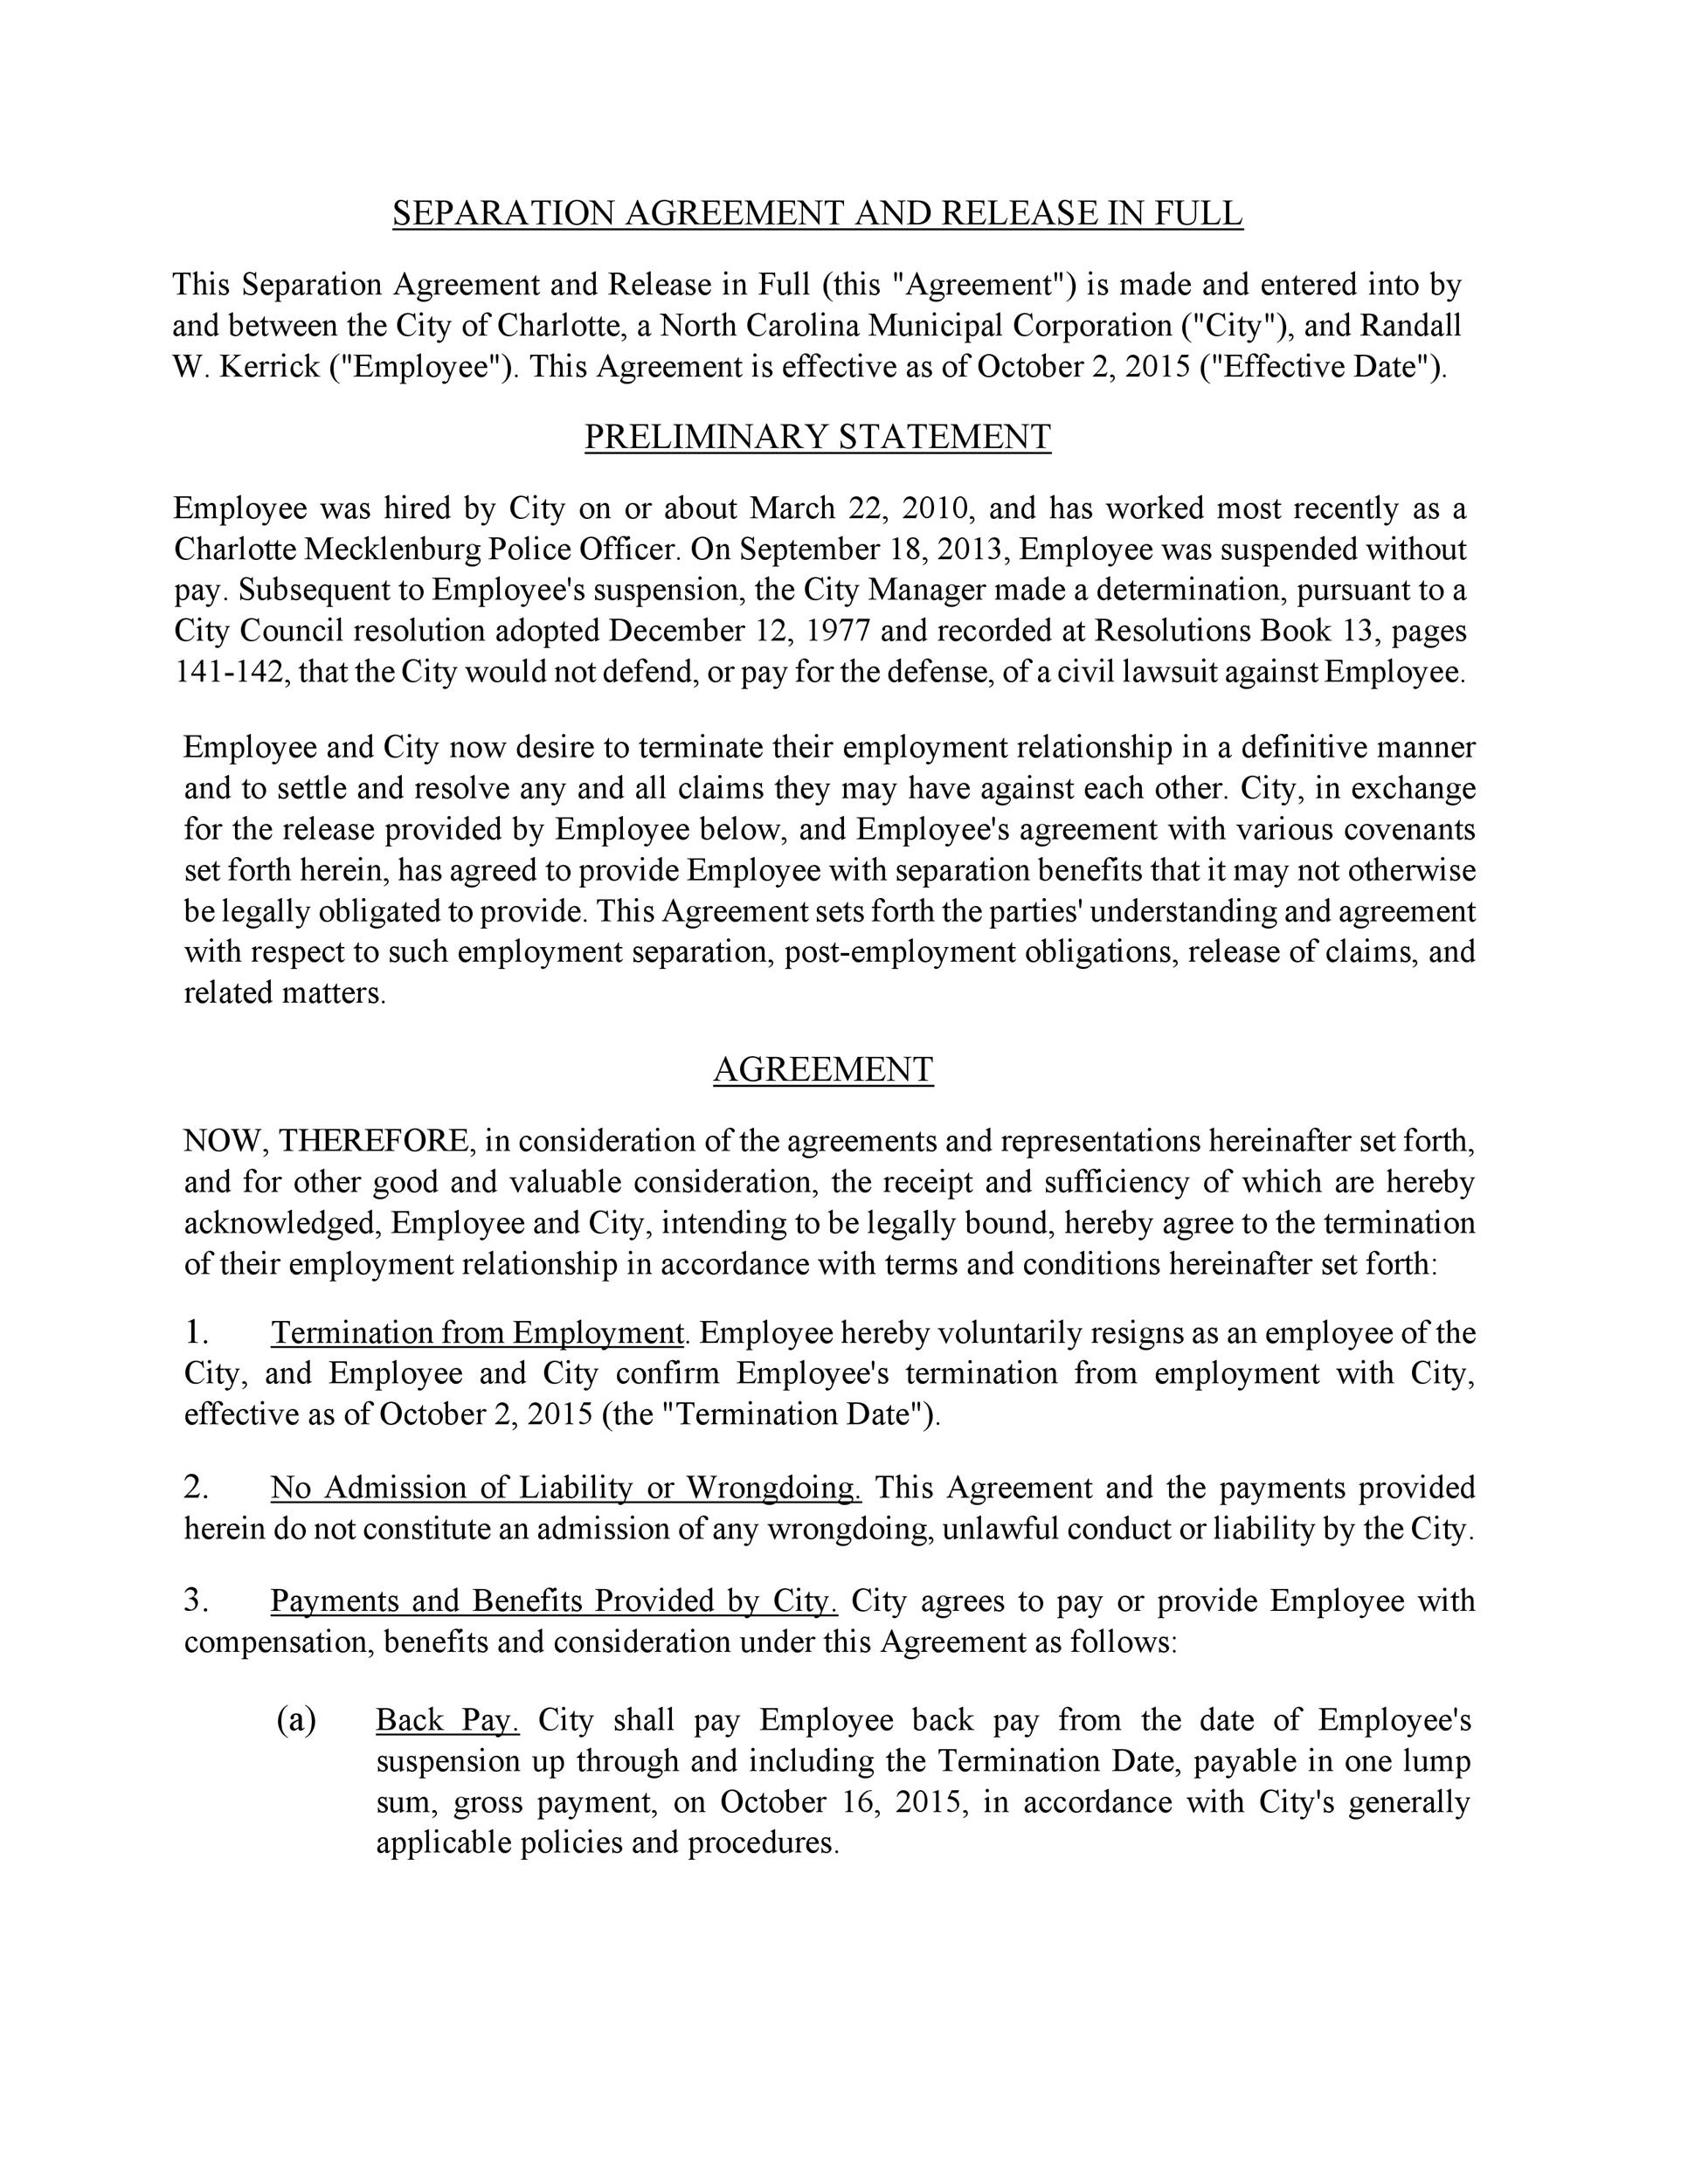 Unmarried Separation Agreement Template